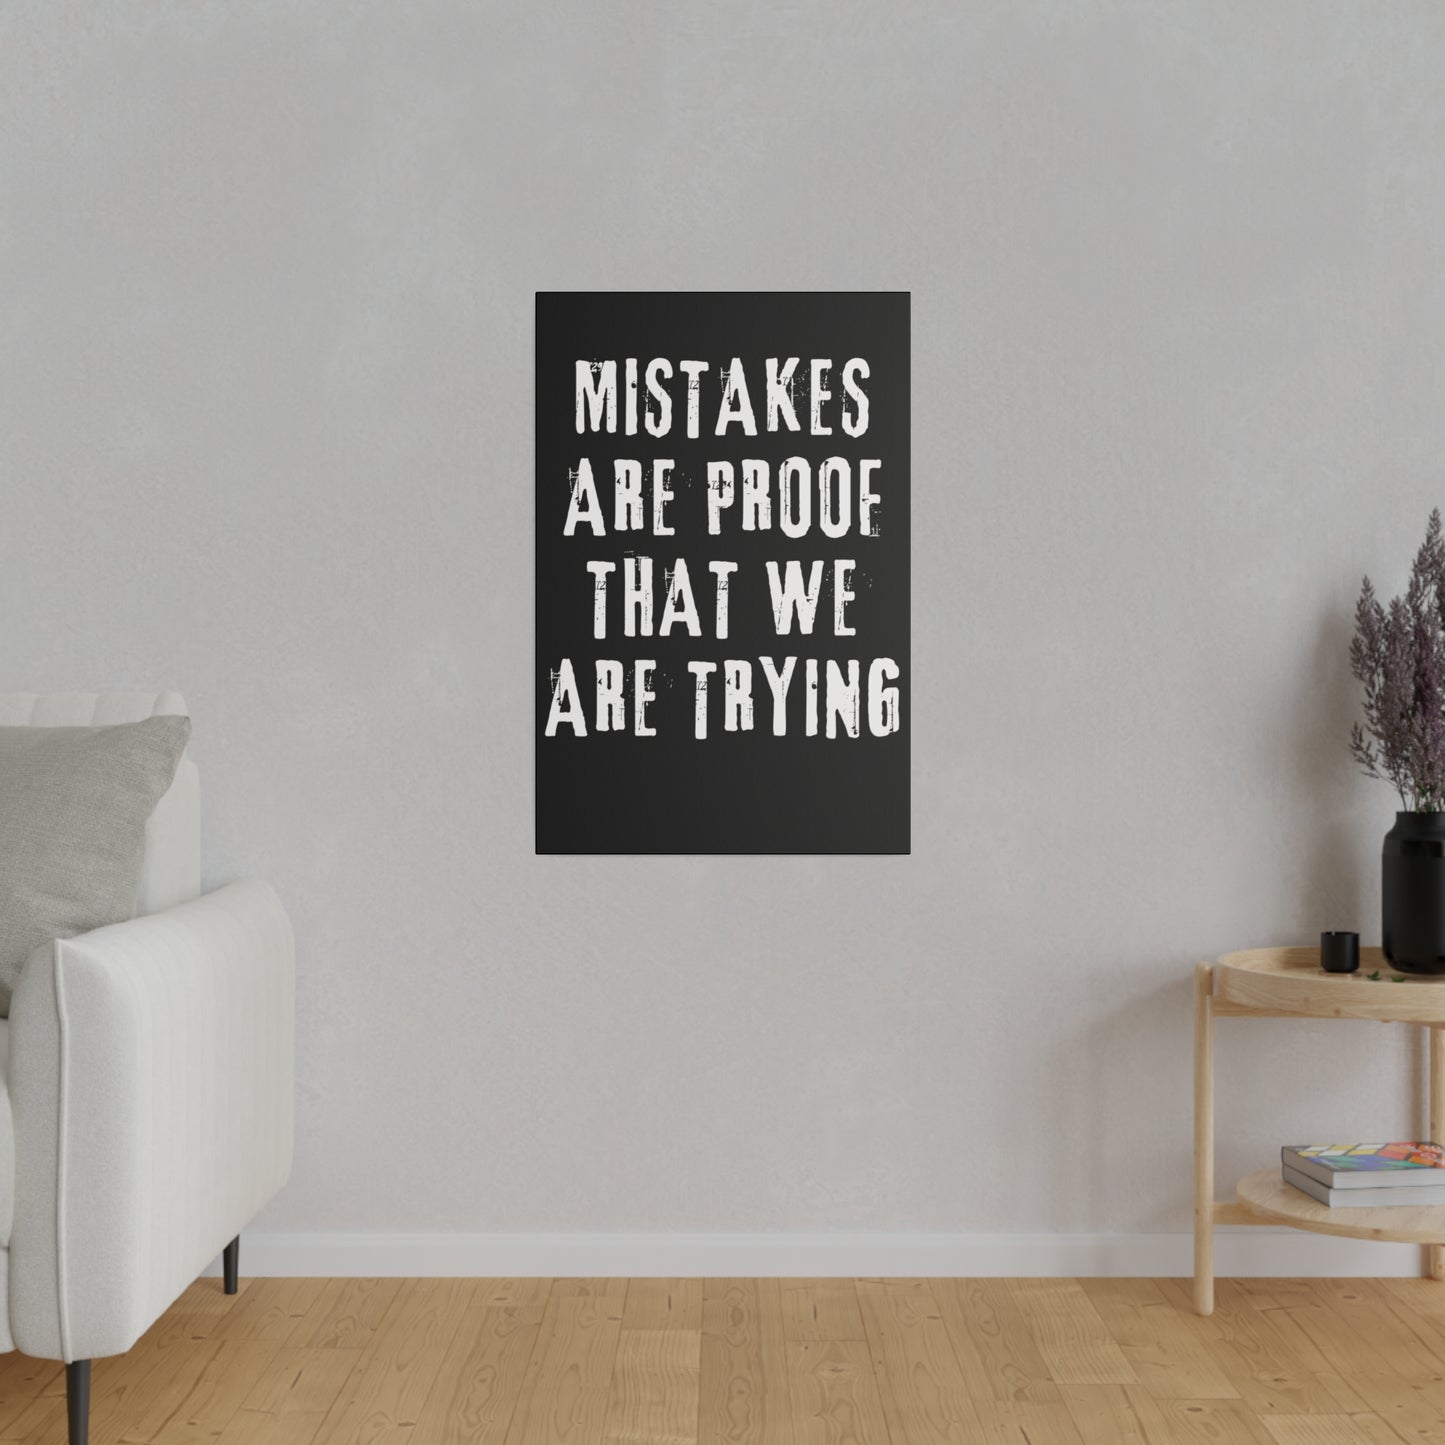 Mistakes are proof Matte Canvas, Stretched, 0.75"